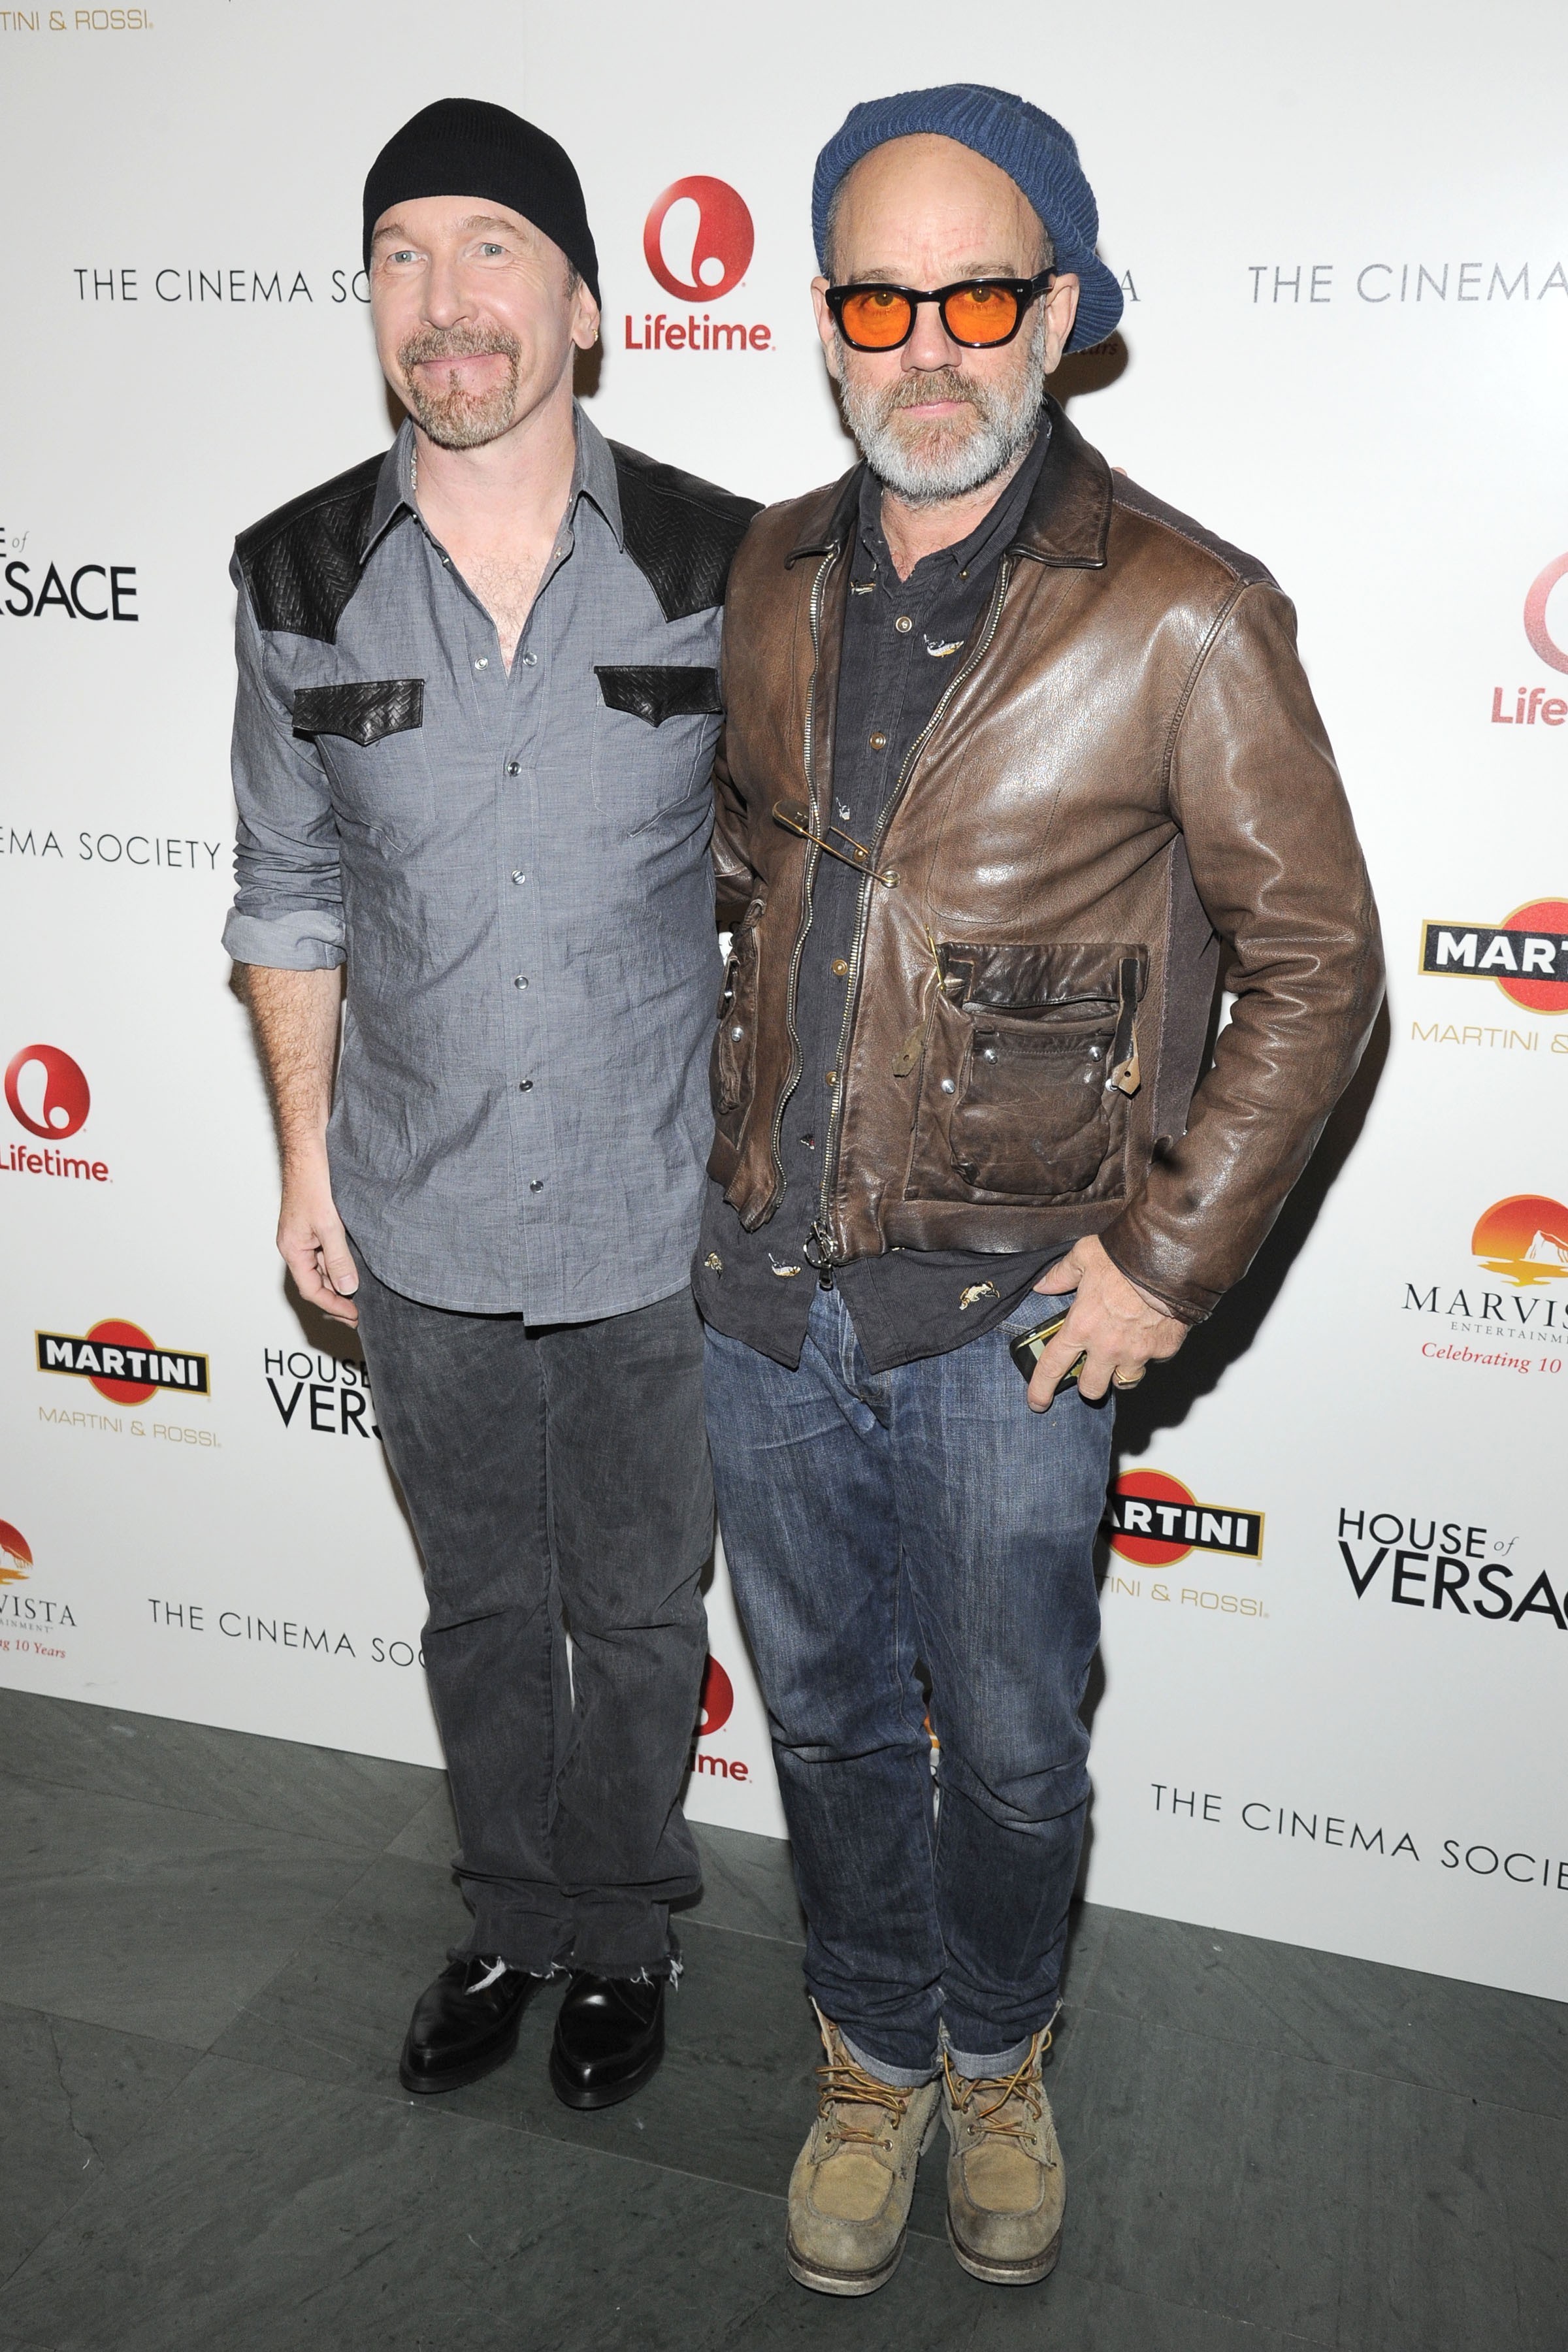 The Edge & Michael Stipe - Marvista Entertainment & Lifetime with The Cinema Society host the after party for "House of Versace"